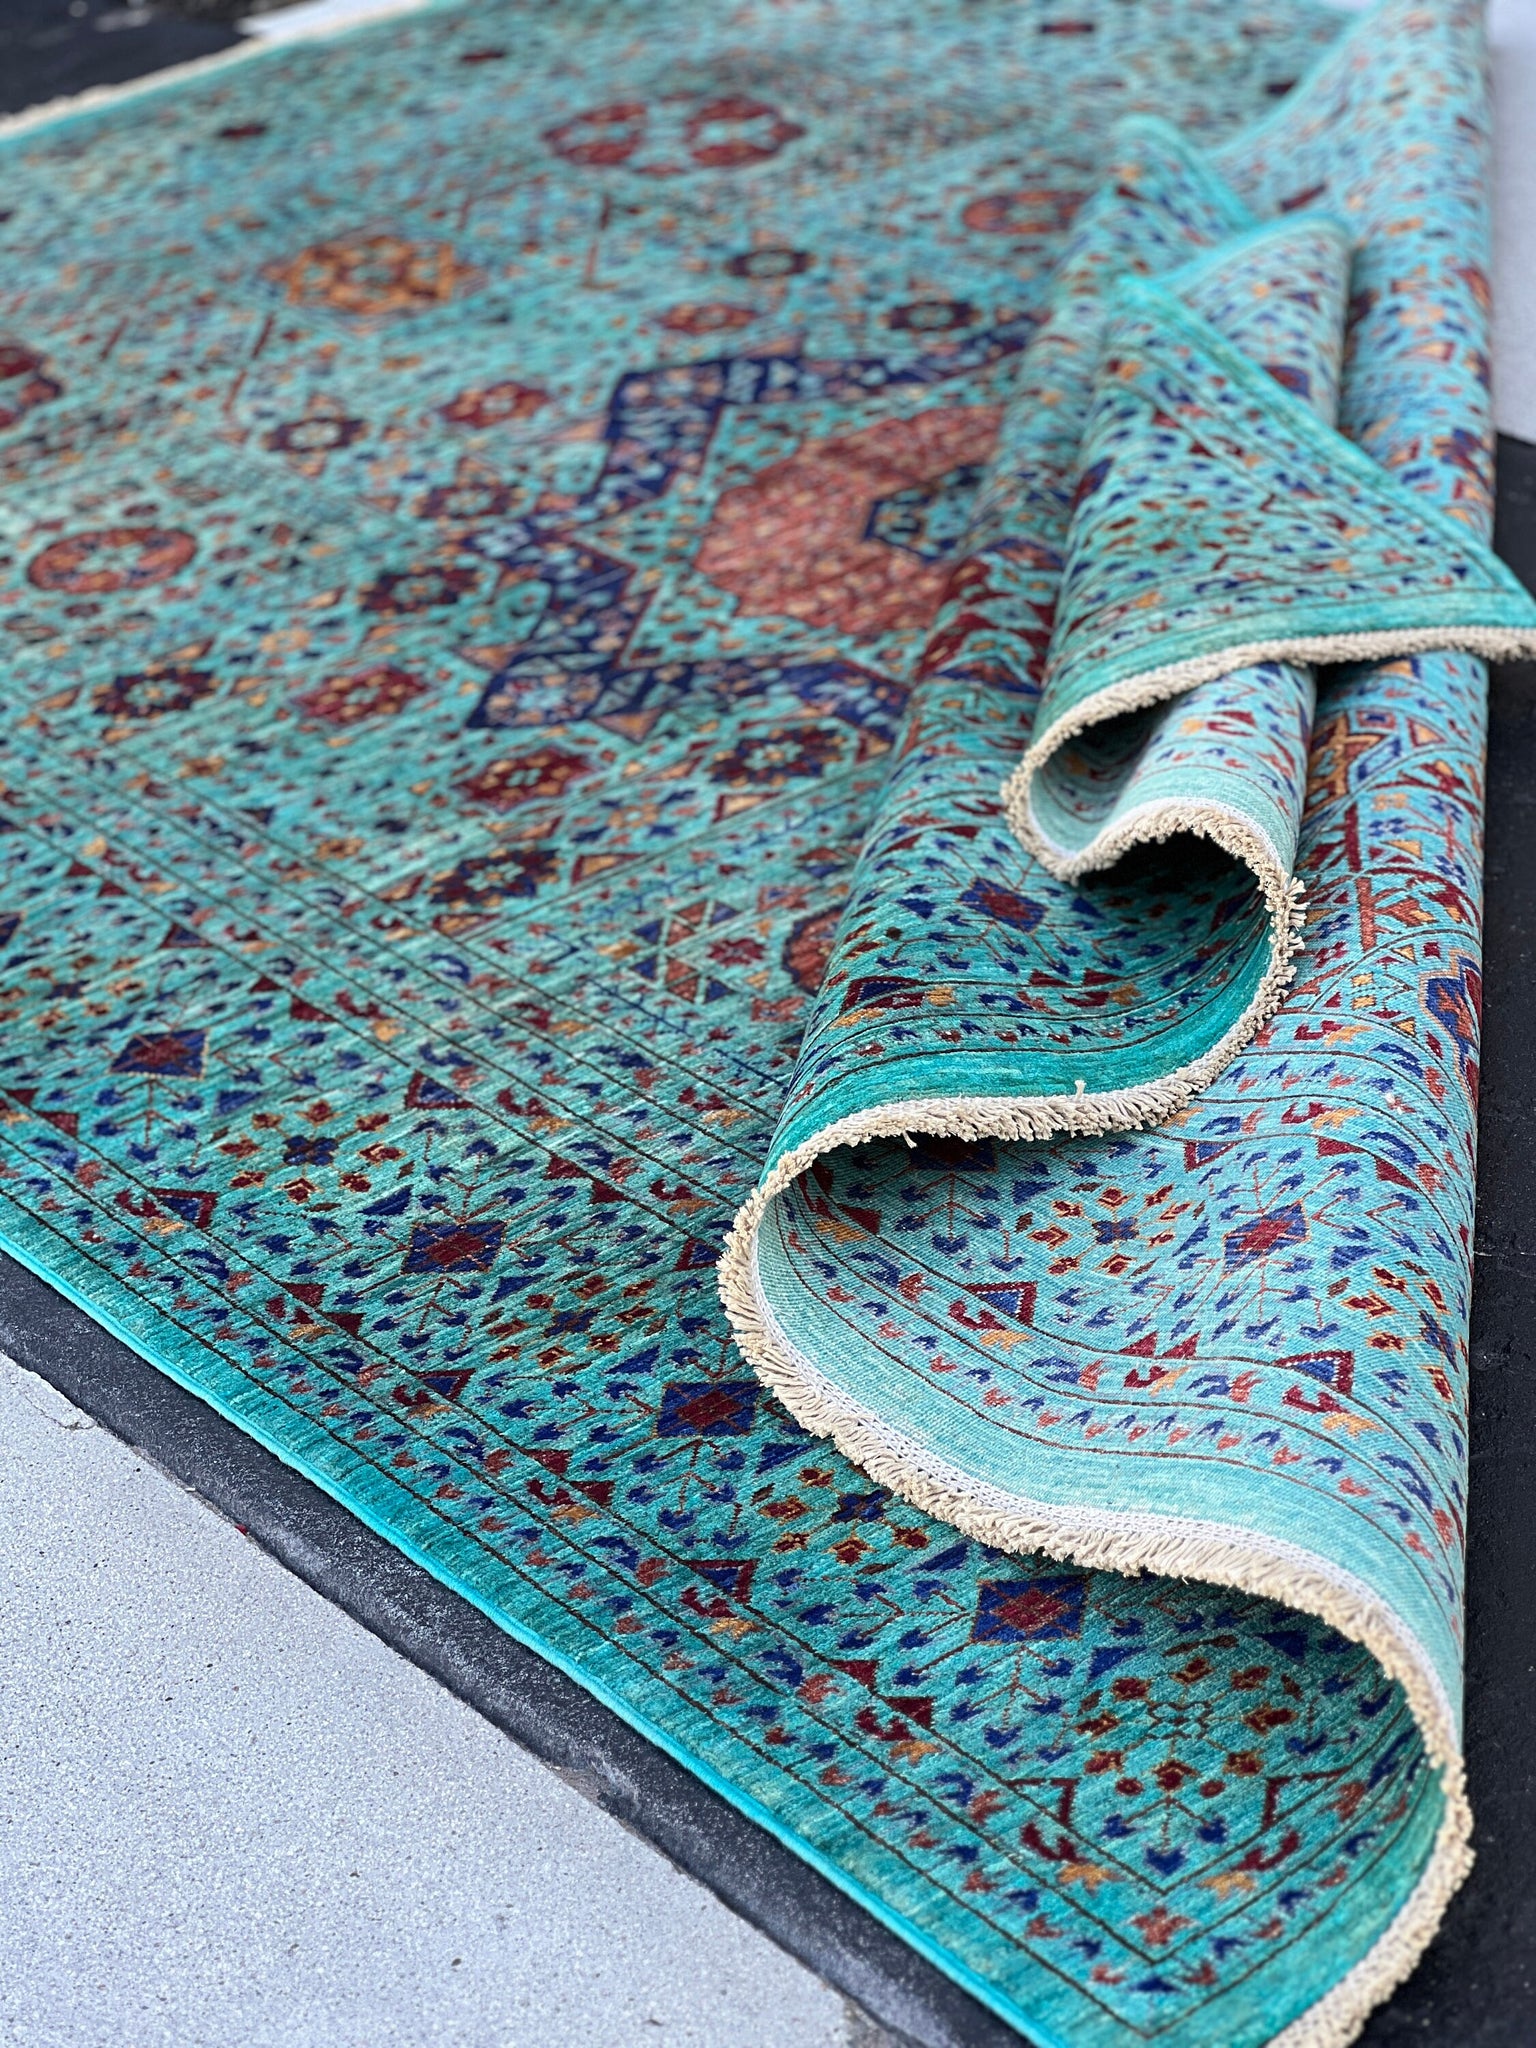 6x8 (180x245) Hand Knotted Afghan Rug | Teal Turquoise Terra Cotta Royal Blue Forest Green Mustard Yellow Ivory Burgundy | Wool Mamluk